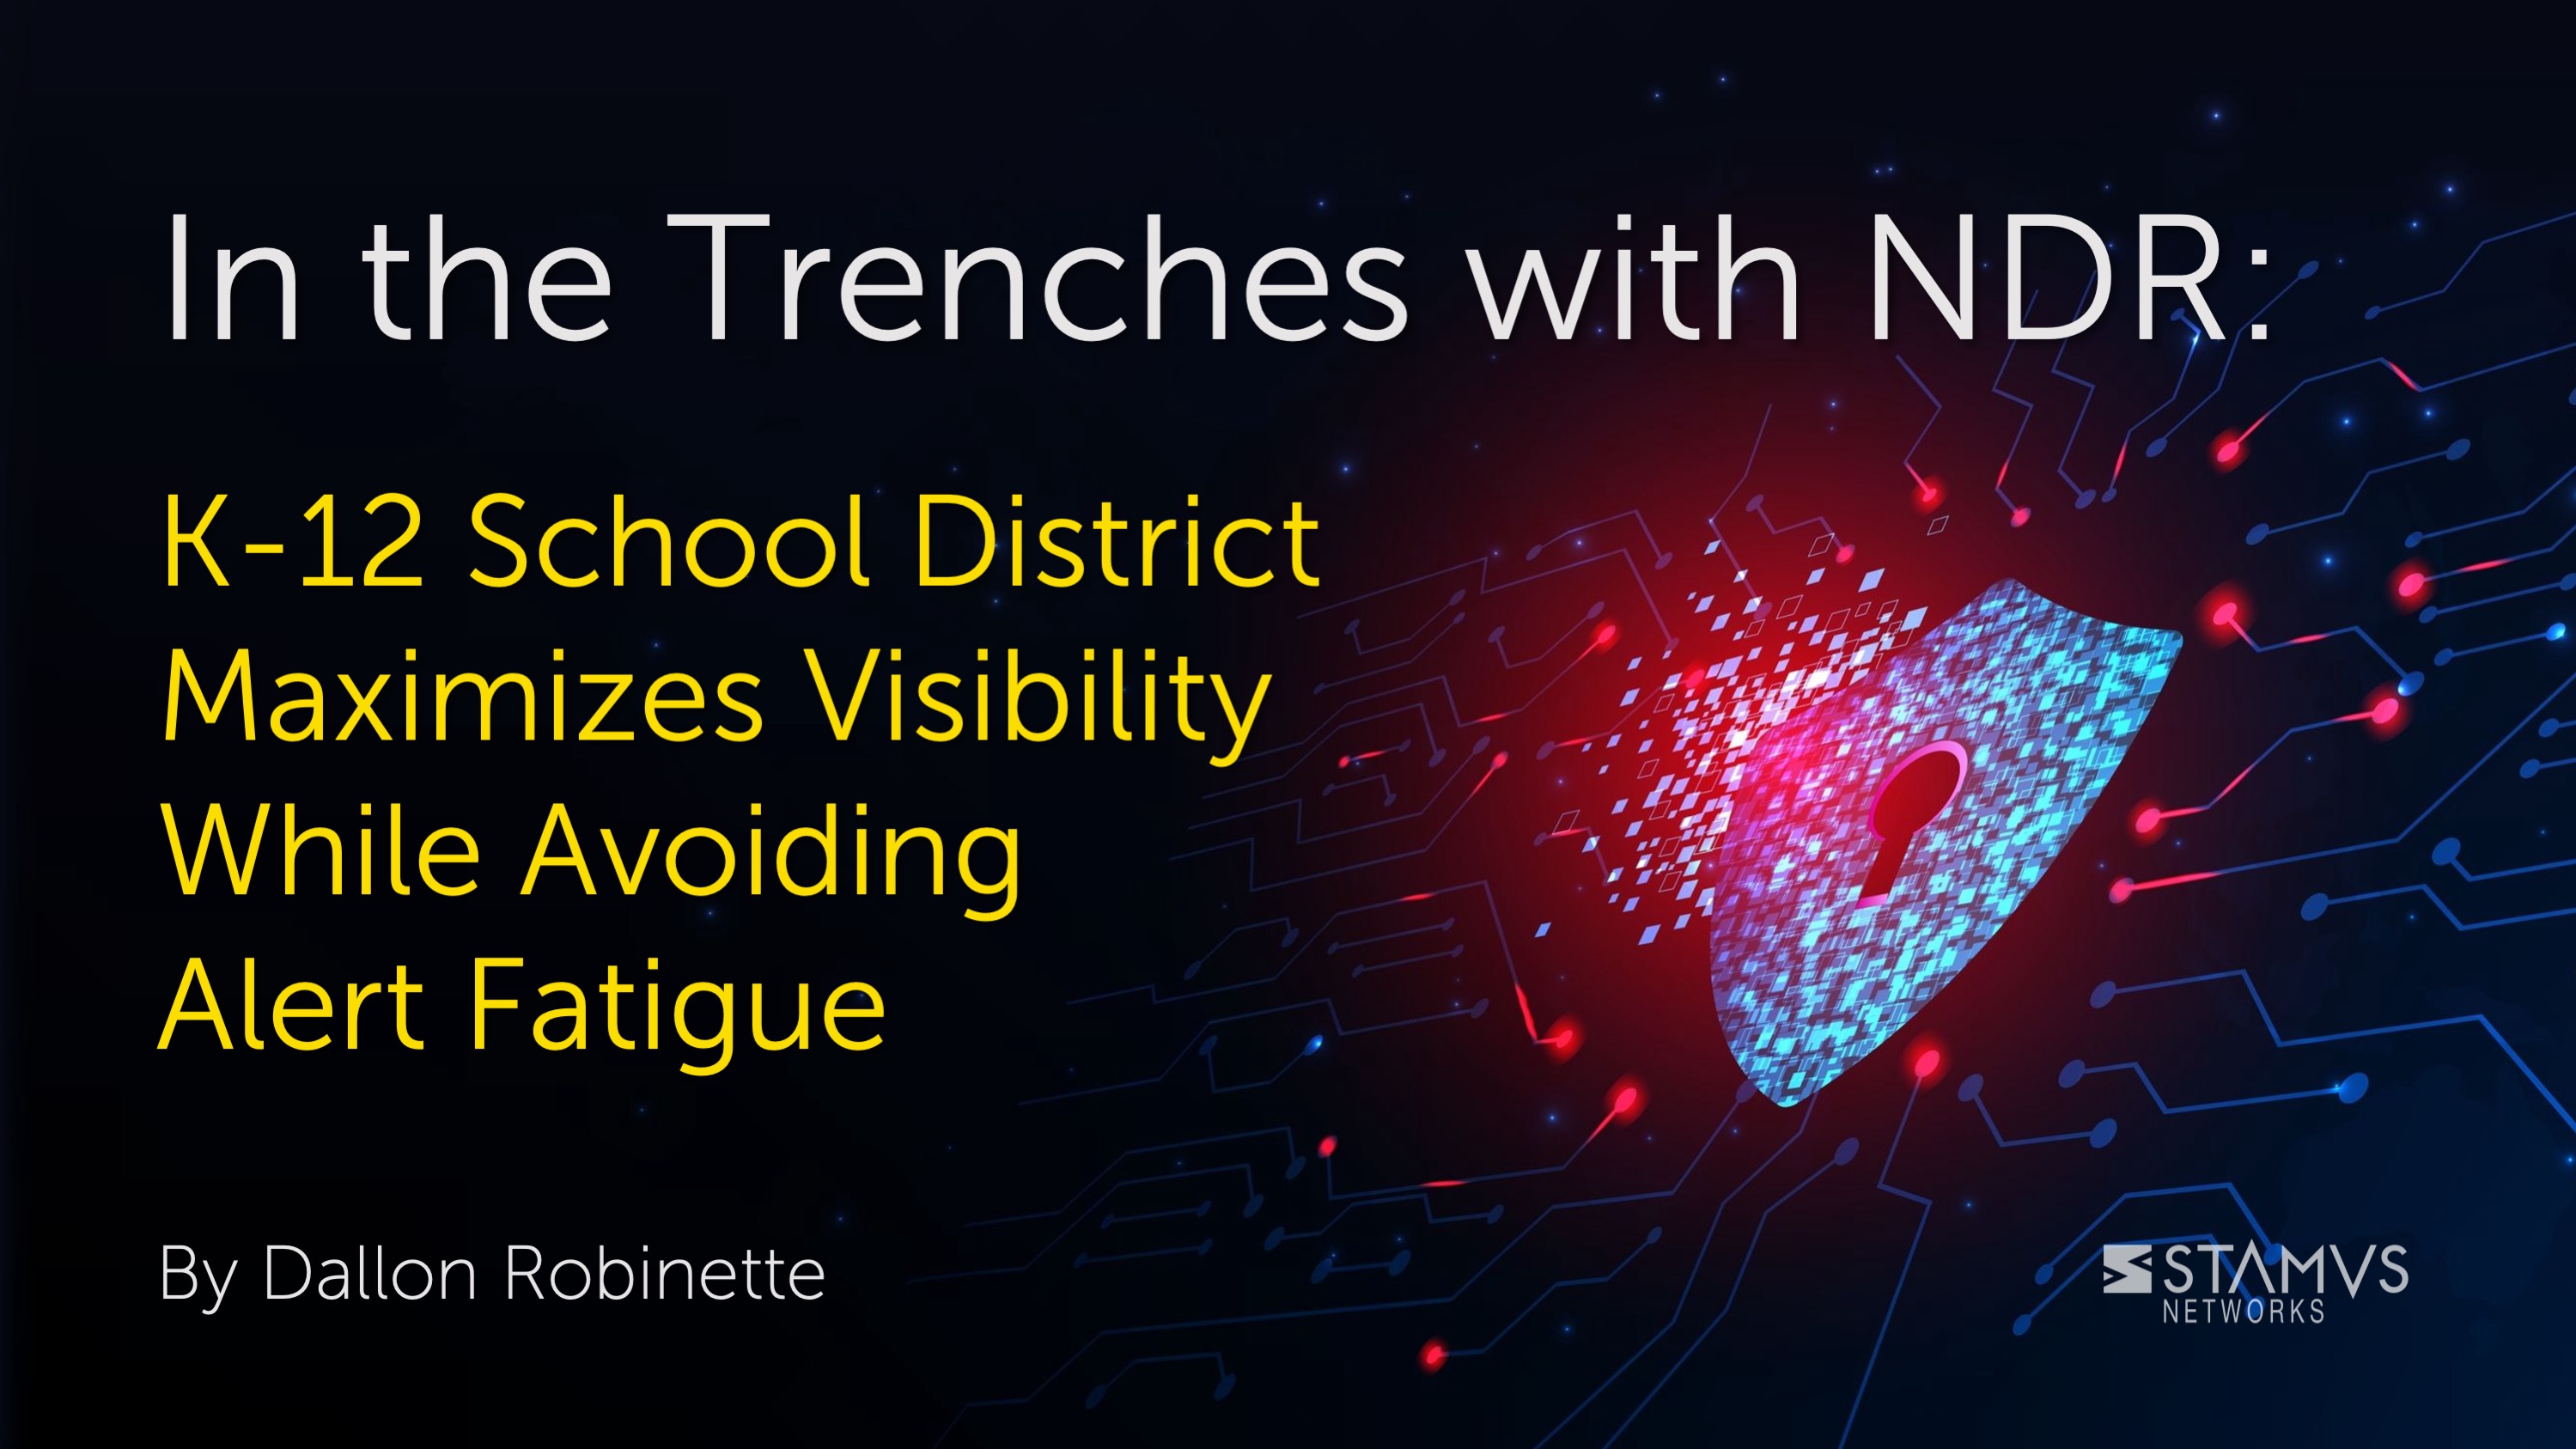 In the Trenches with NDR: K-12 School District Maximizes Visibility While Avoiding Alert Fatigue by Dallon Robinette